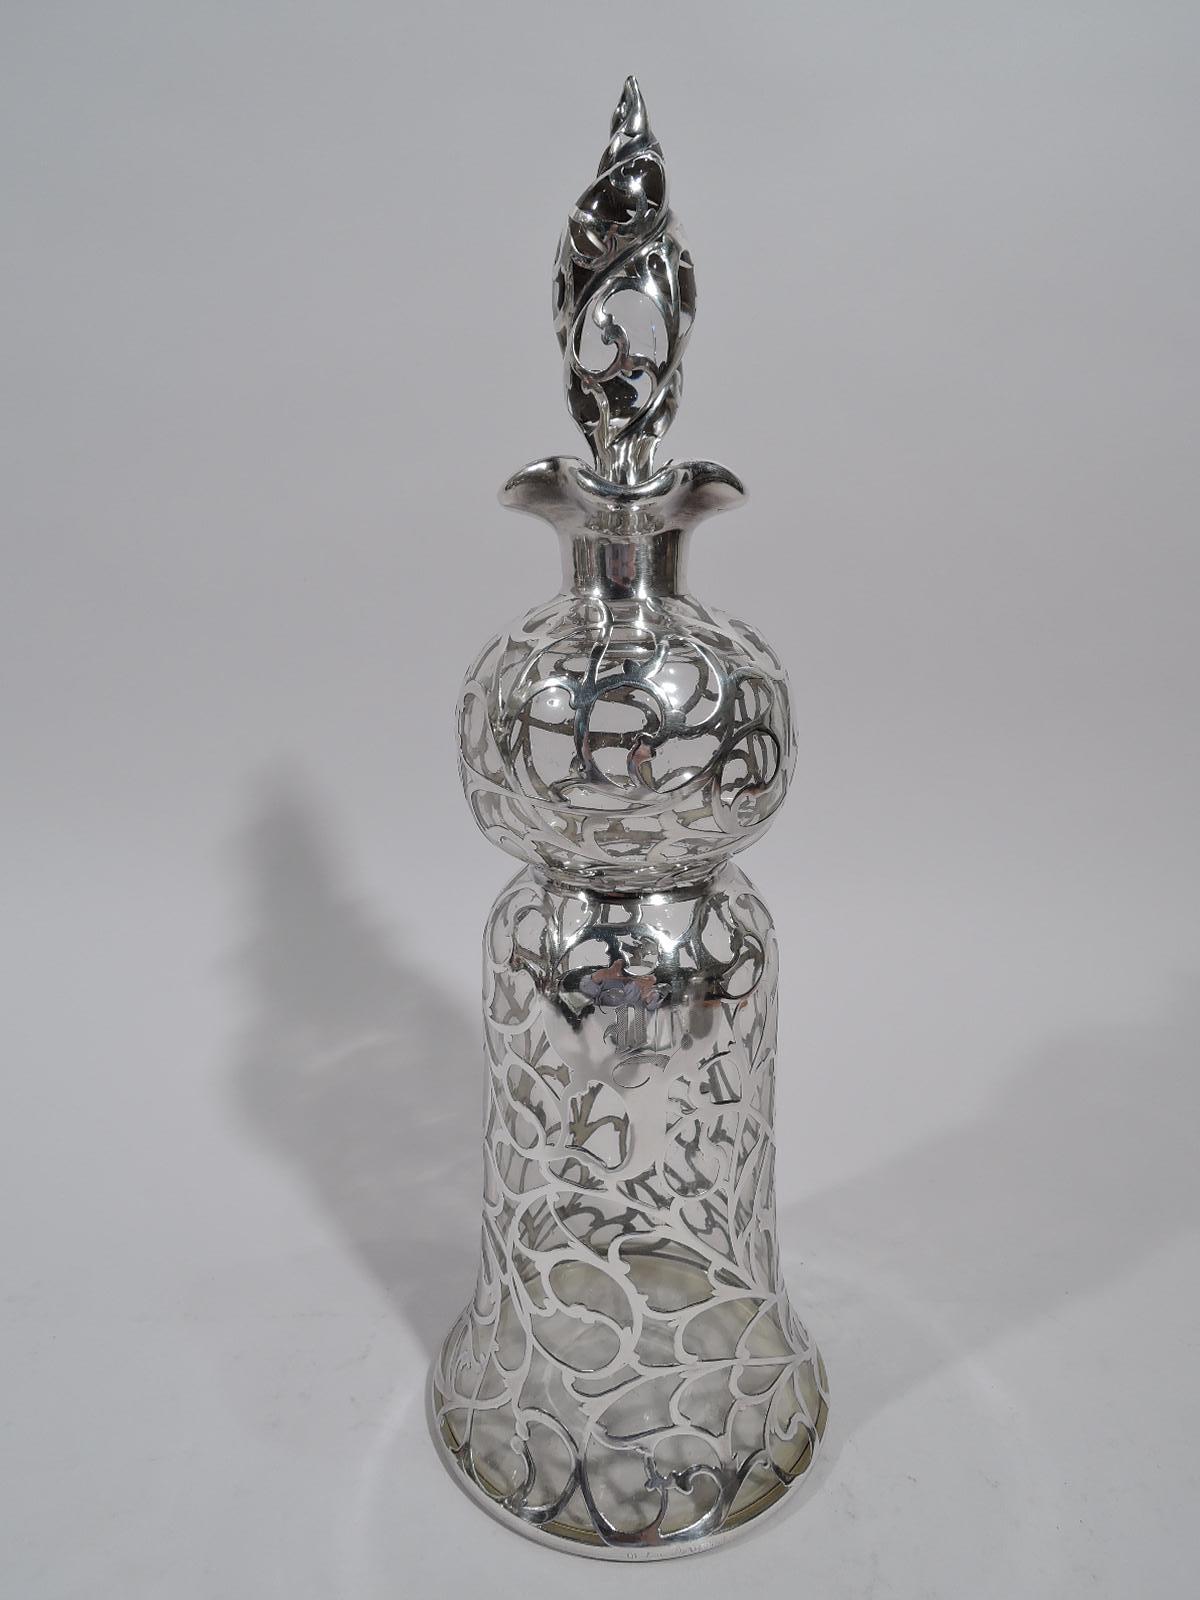 Turn-of-the-century Art Nouveau glass decanter with silver overlay. Globular top and bell-form bottom. Short neck and ruffled quatrefoil mouth in silver collar. Dense scrolling overlay and armorial cartouche engraved with single-letter monogram.